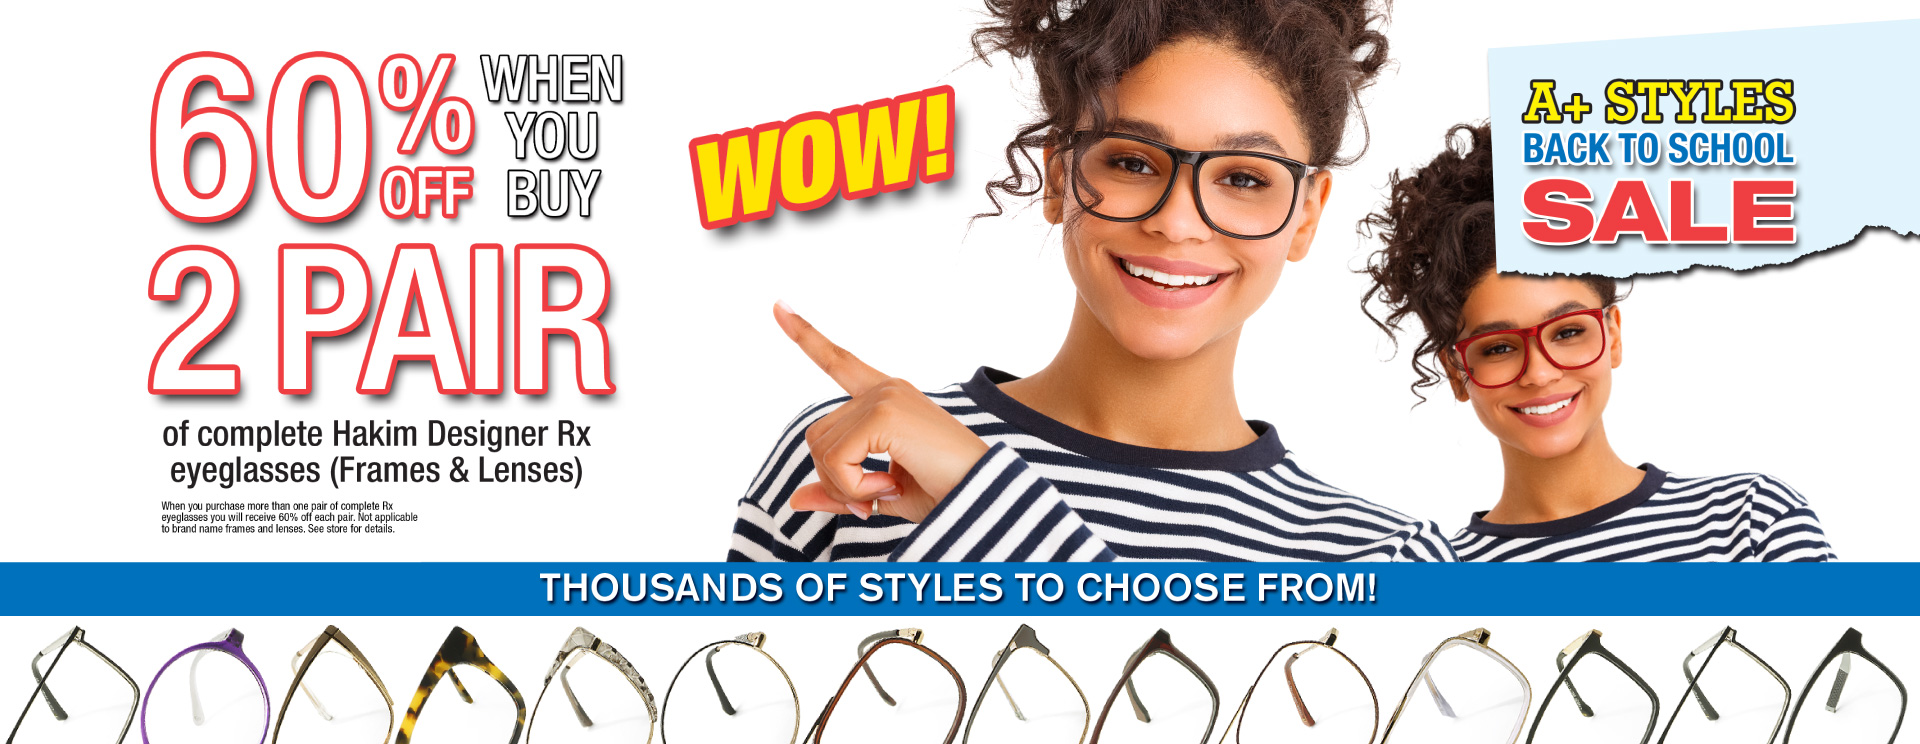 Hakim Optical's Big Winter Sale - Save 60% when you buy 2-pair and purchase the 3rd pair from only $99